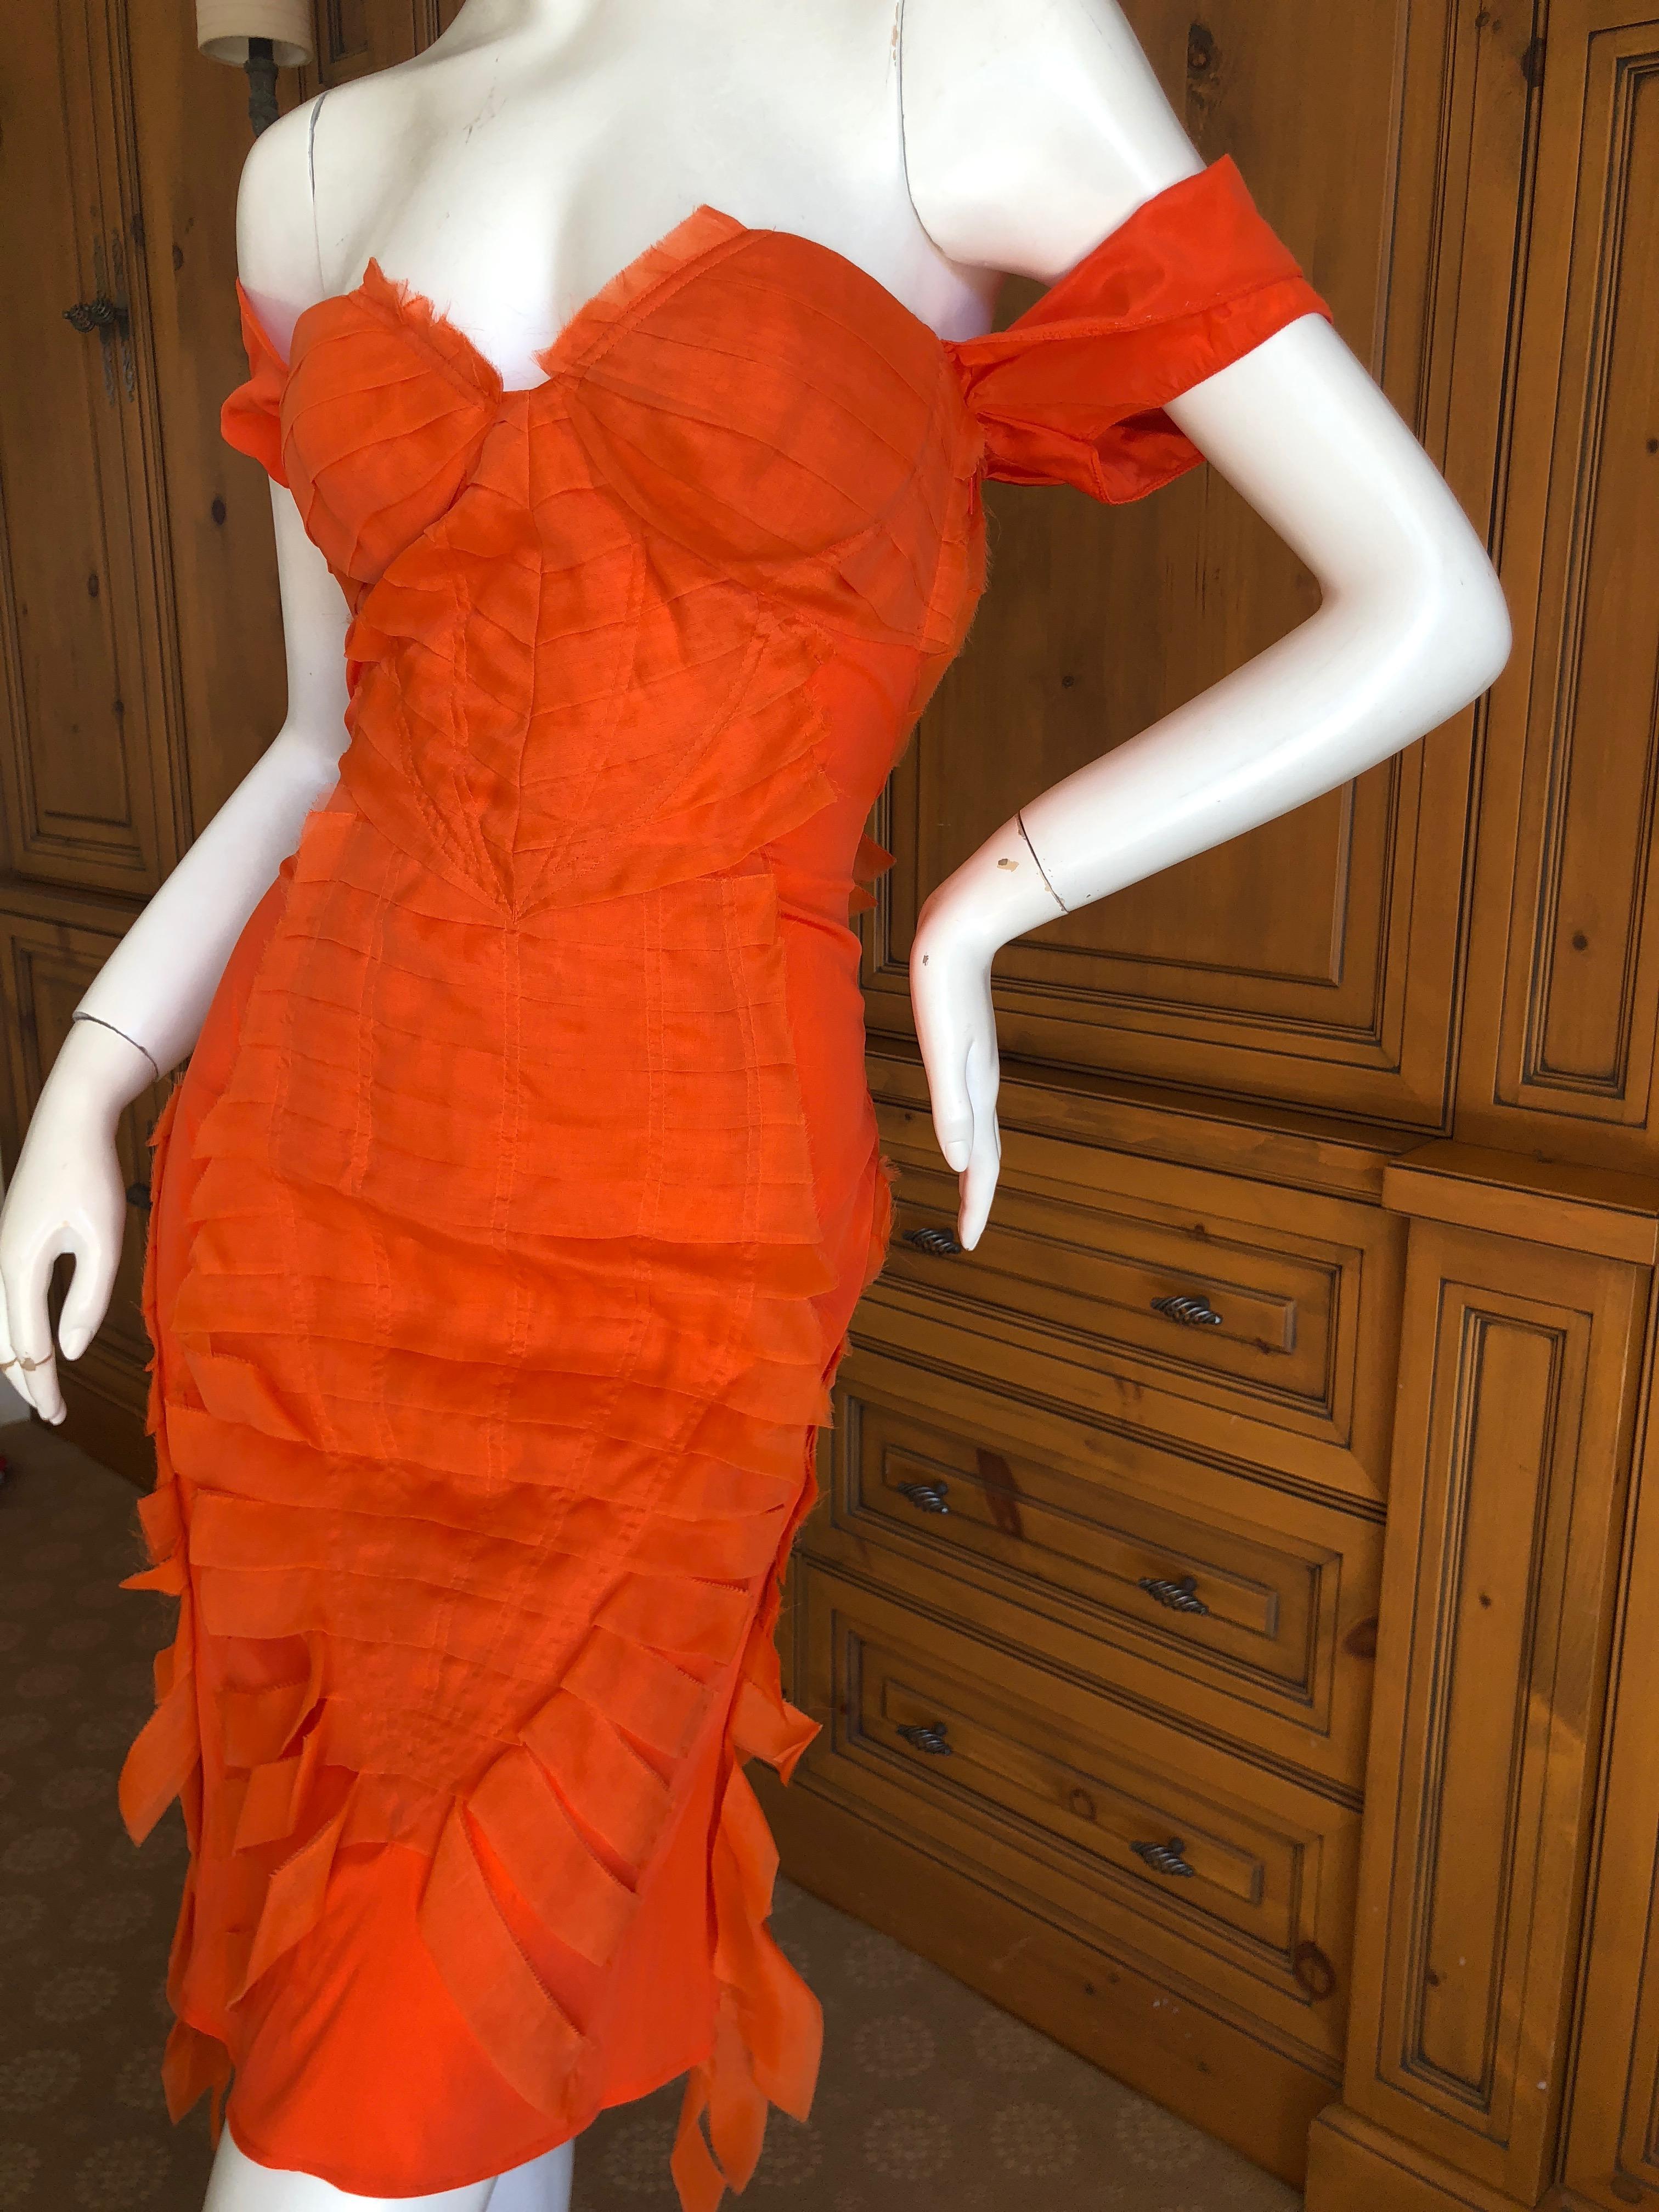 Gucci by Tom Ford 2004 Orange Ribbon Dress Tom Ford Book Piece New Tags For Sale 2